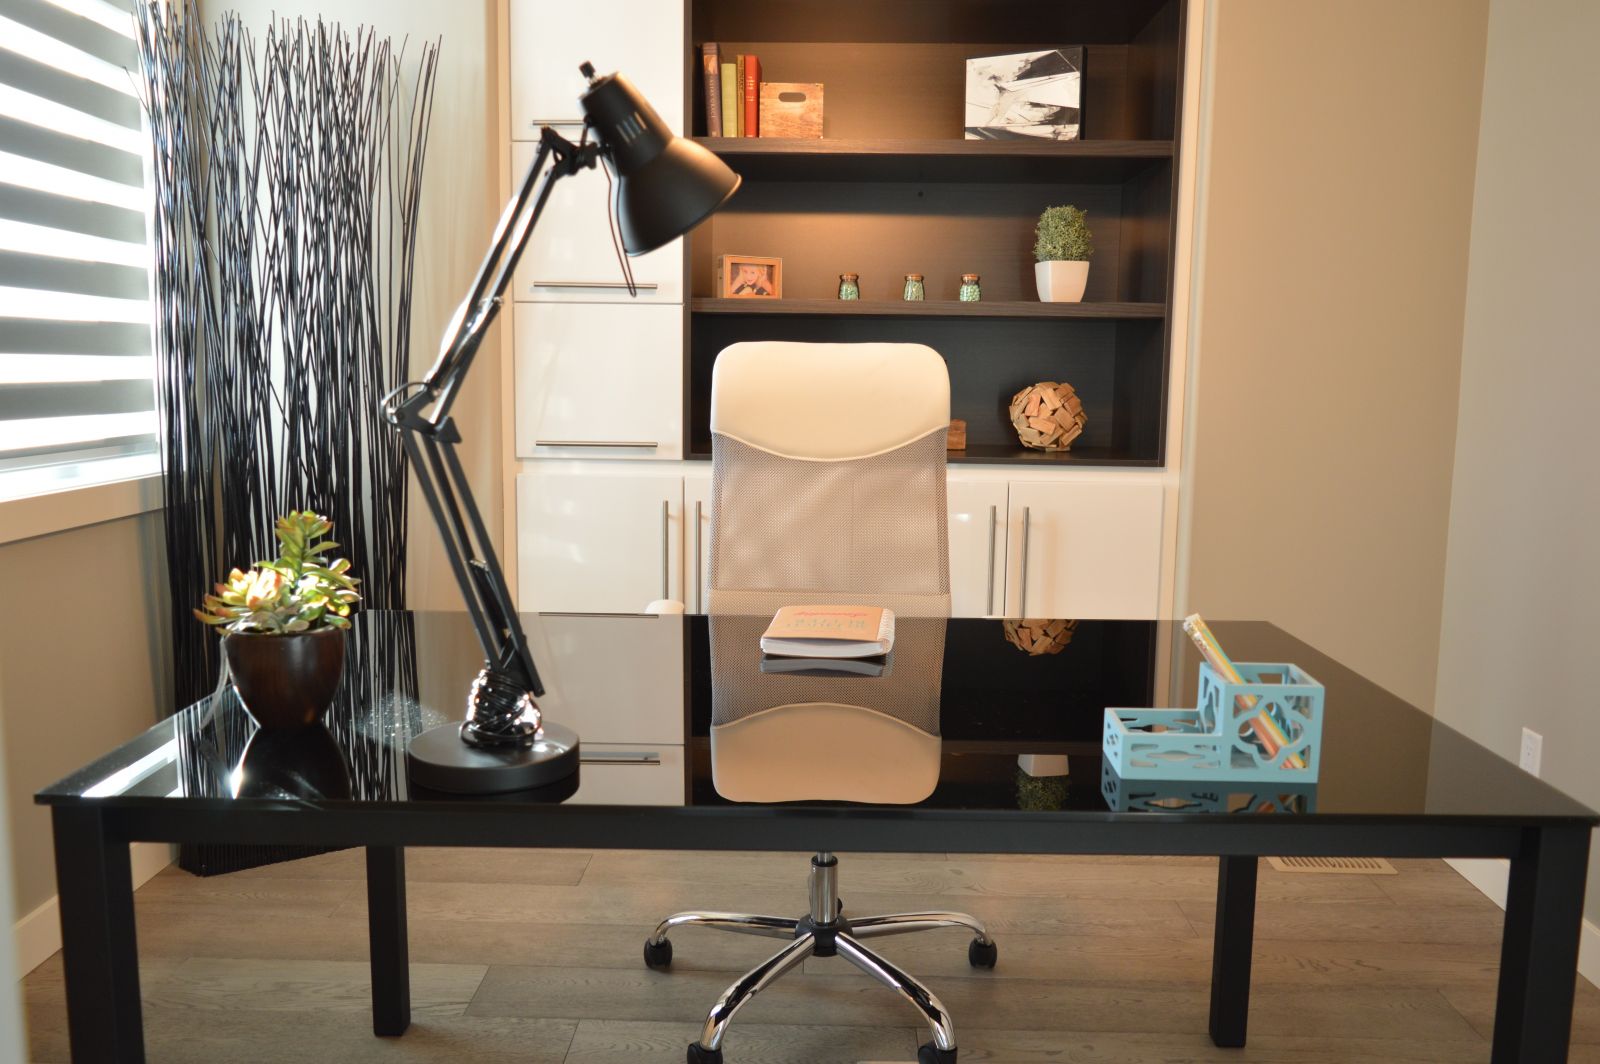 Home office with desk, rolling chair, and styled shelves